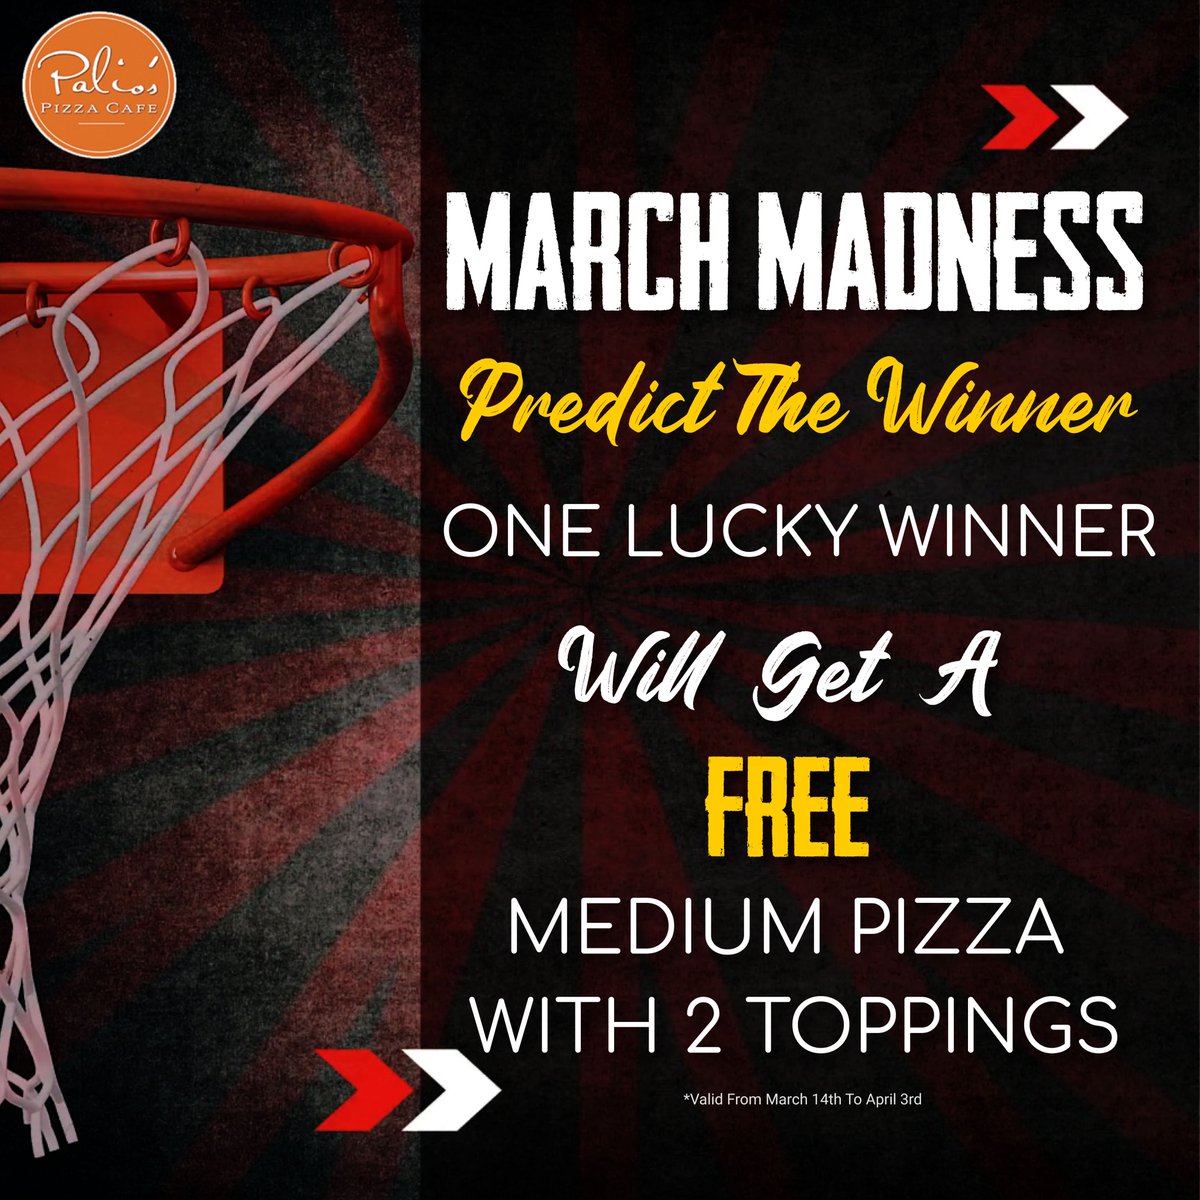 Make a correct prediction on the NCAA victor and enjoy a complimentary medium pizza adorned with your choice of two toppings.

Offer valid from March 14th to April 3rd.

#PaliosPizza #bestpizza #PizzaCafe #Cannoli #instapizza #NCAA